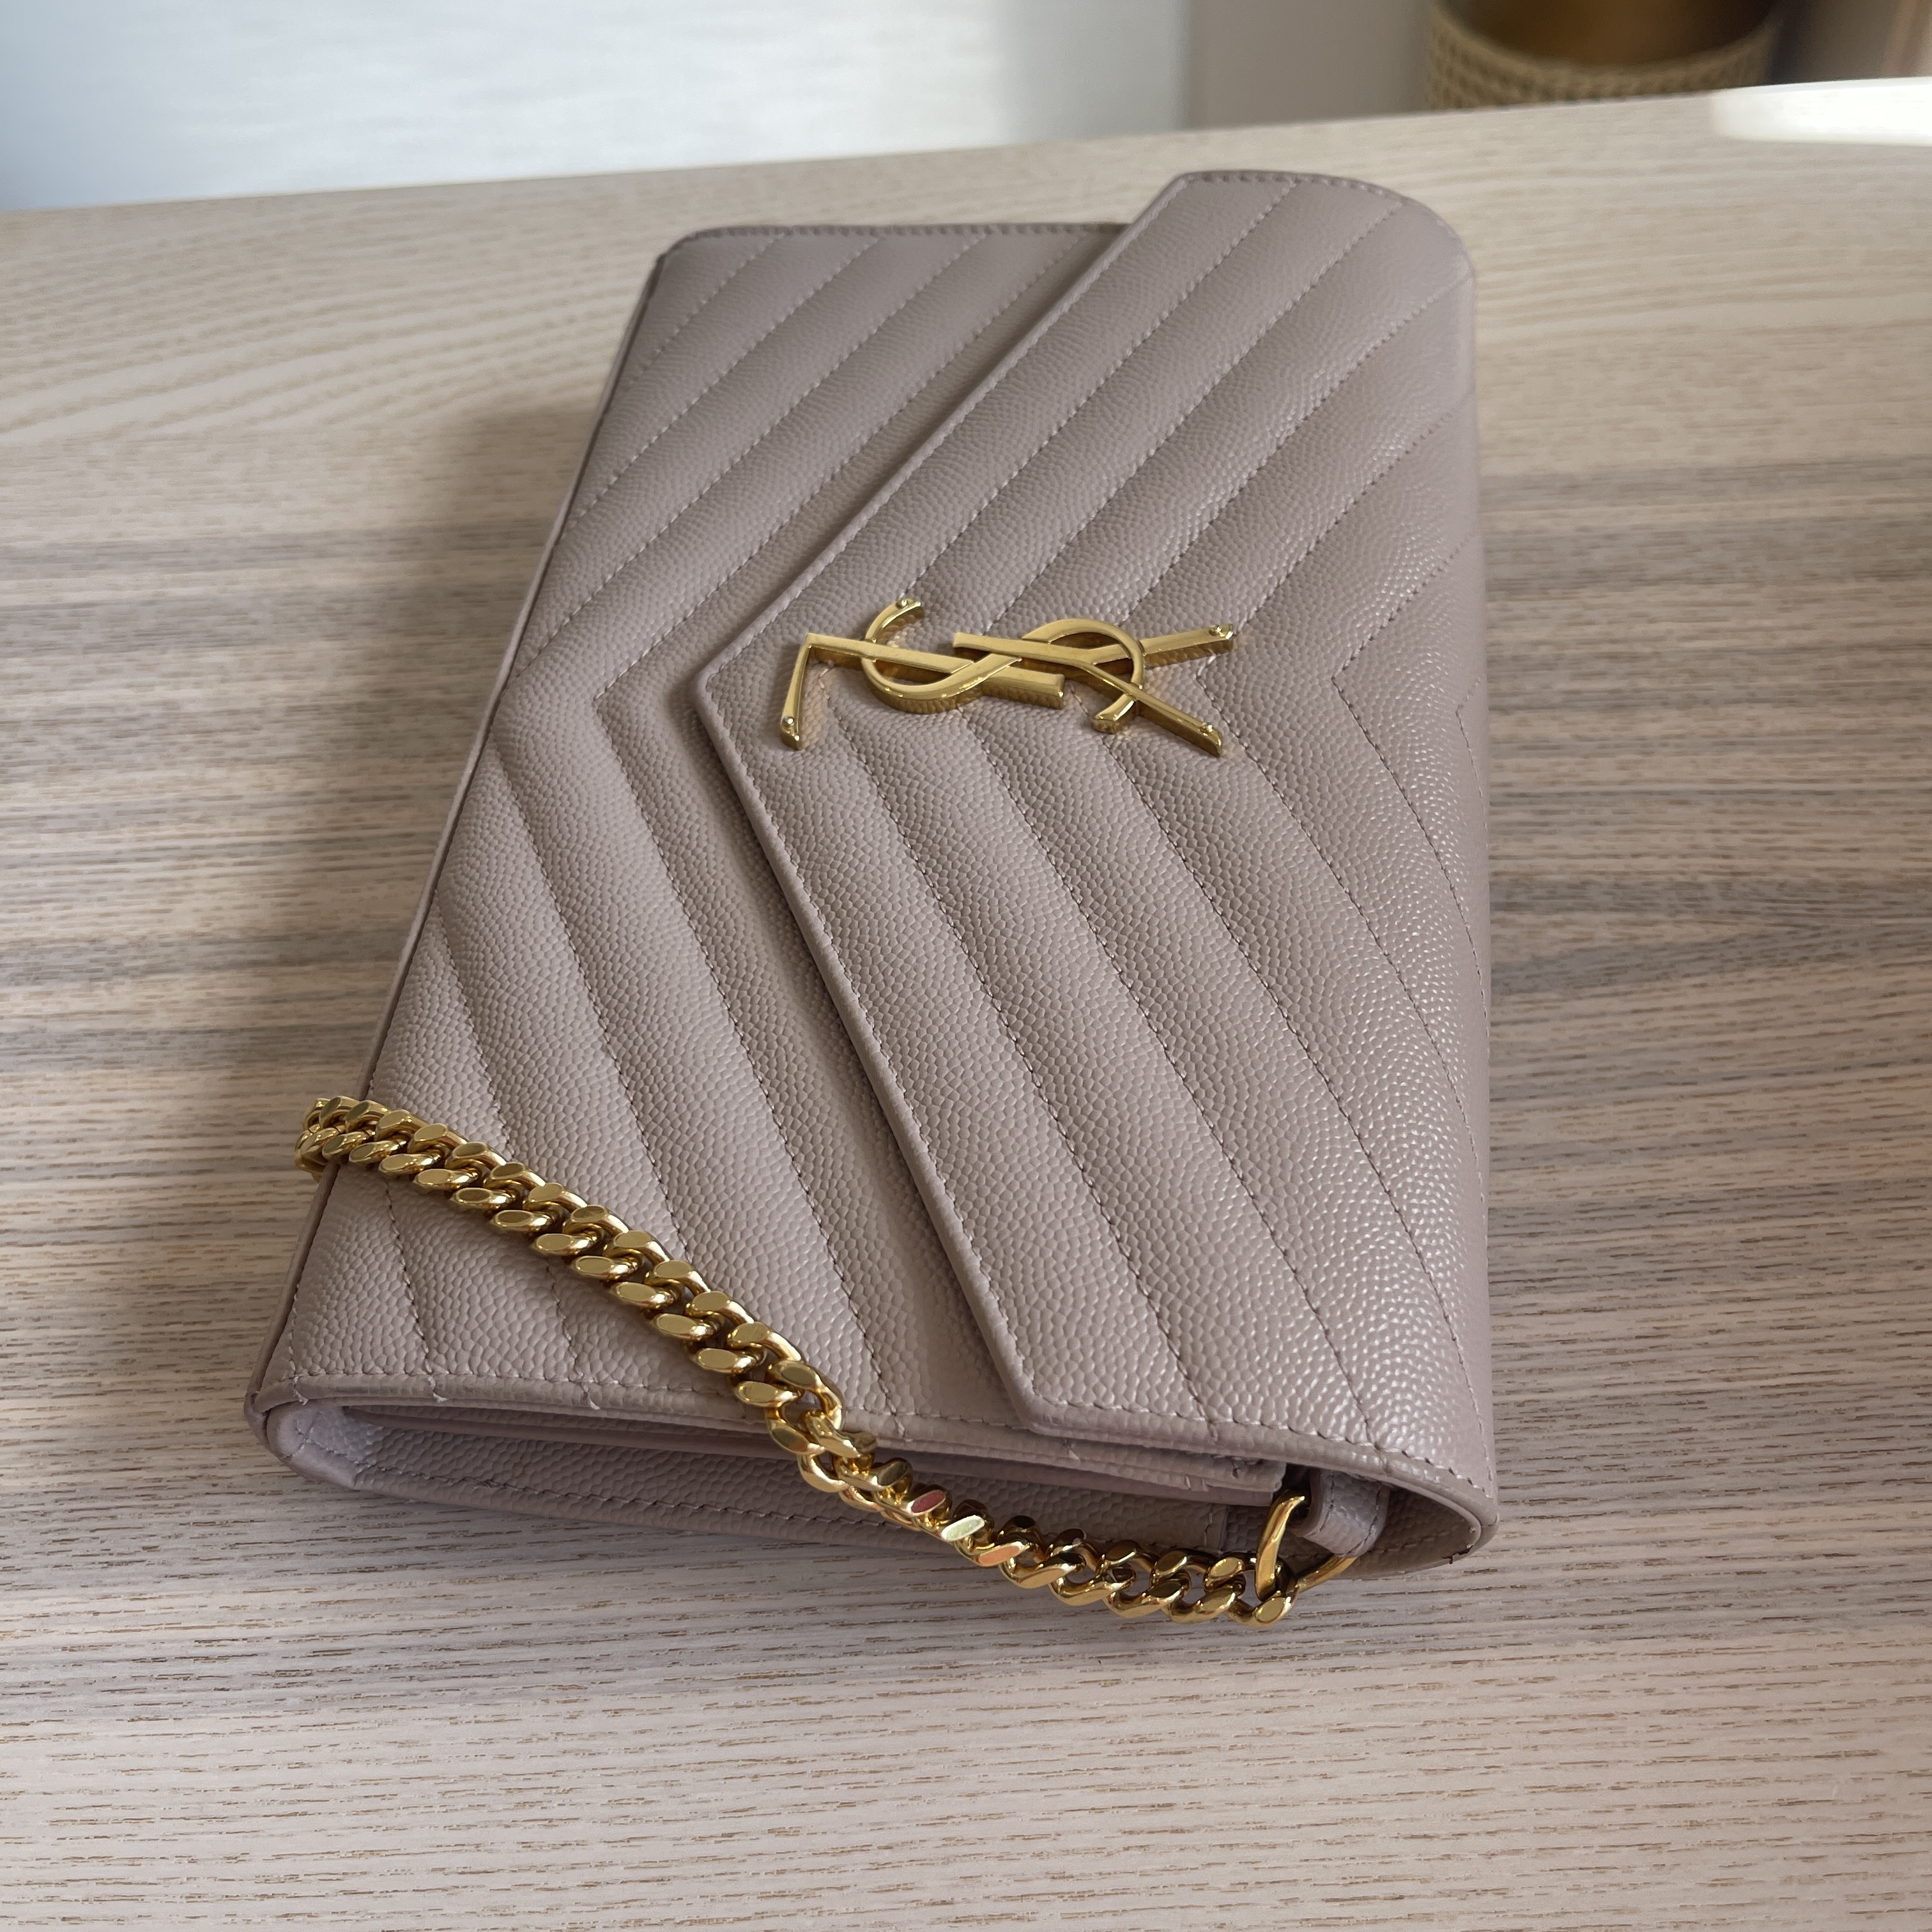 — YSL's envelope chain wallet gives casual